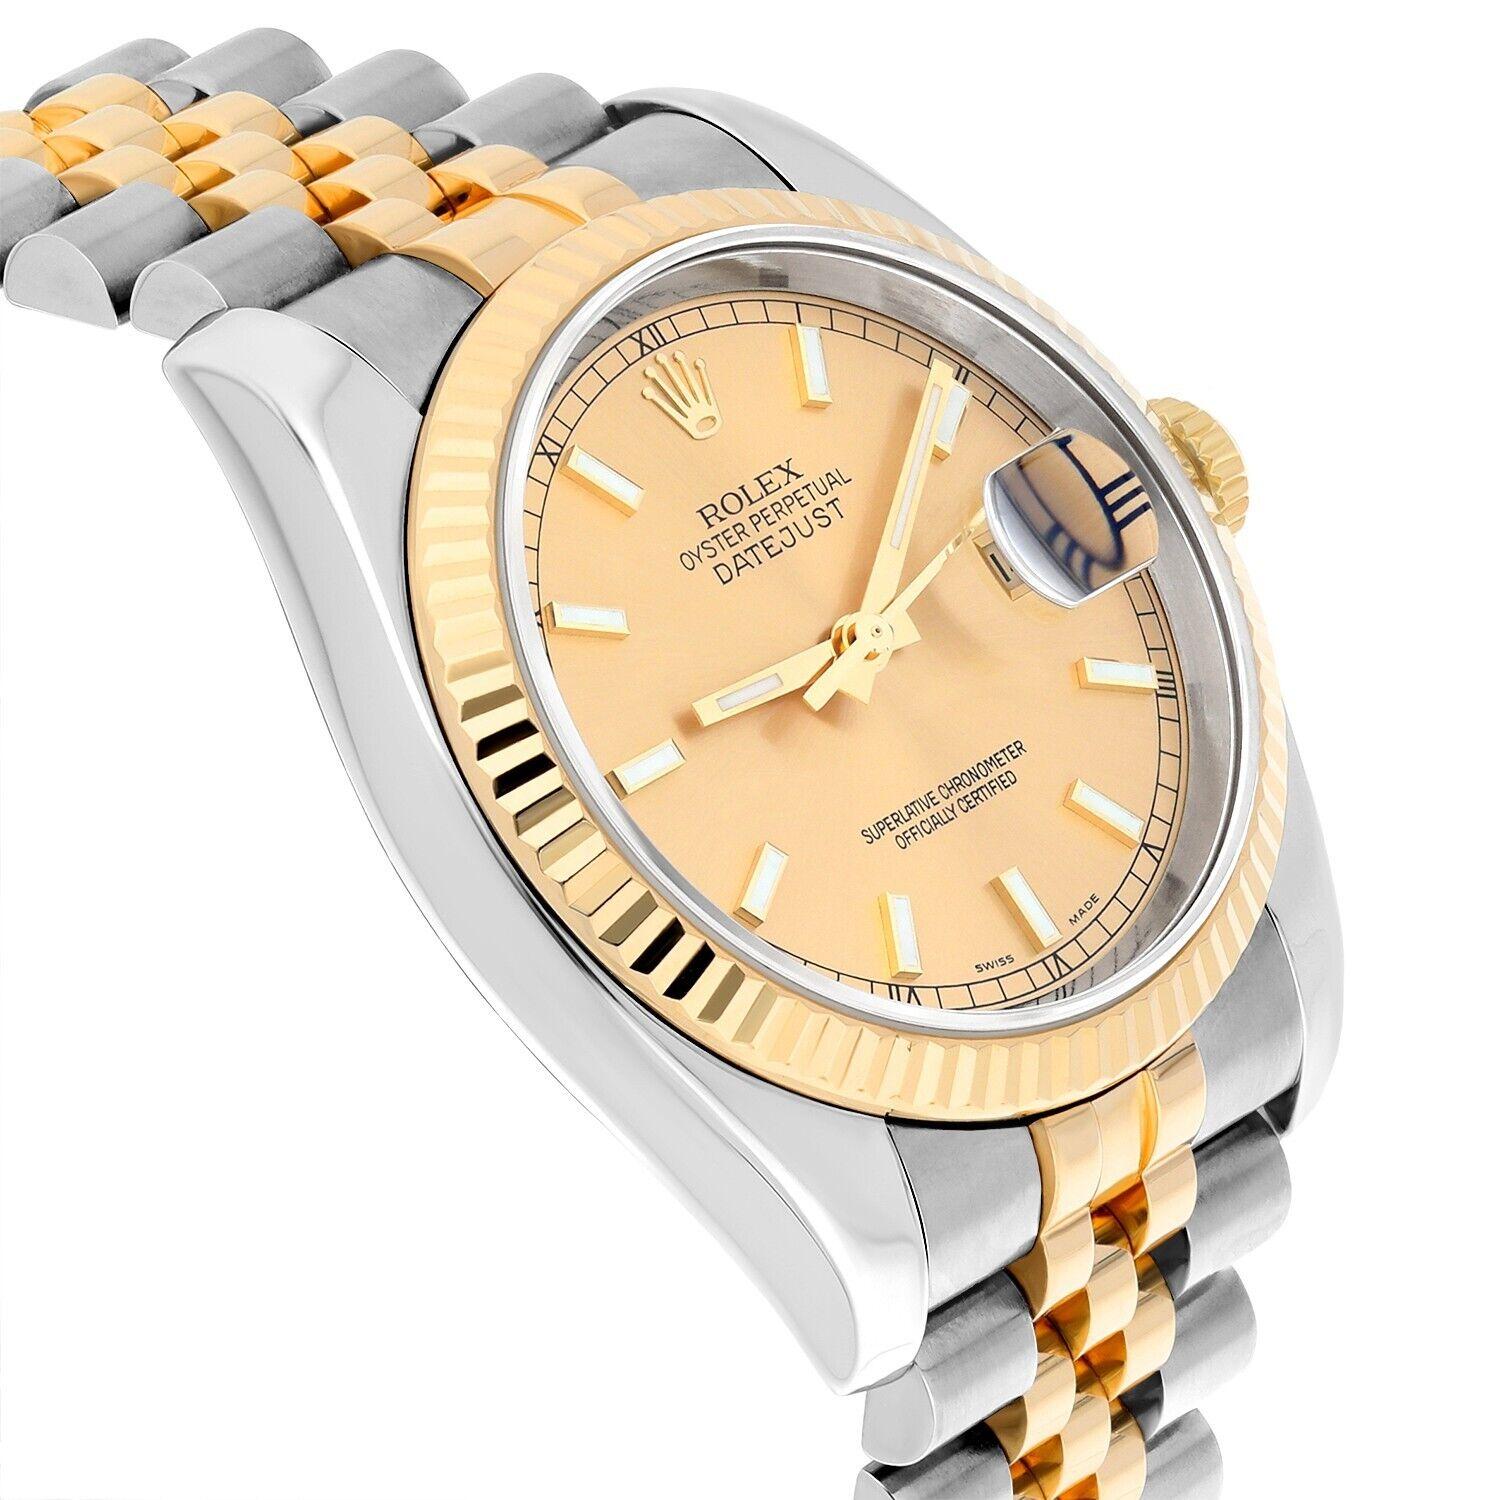 Rolex Datejust 36 Gold & Steel 116233 Watch Champagne Index Dial Jubilee Watch In Excellent Condition For Sale In New York, NY